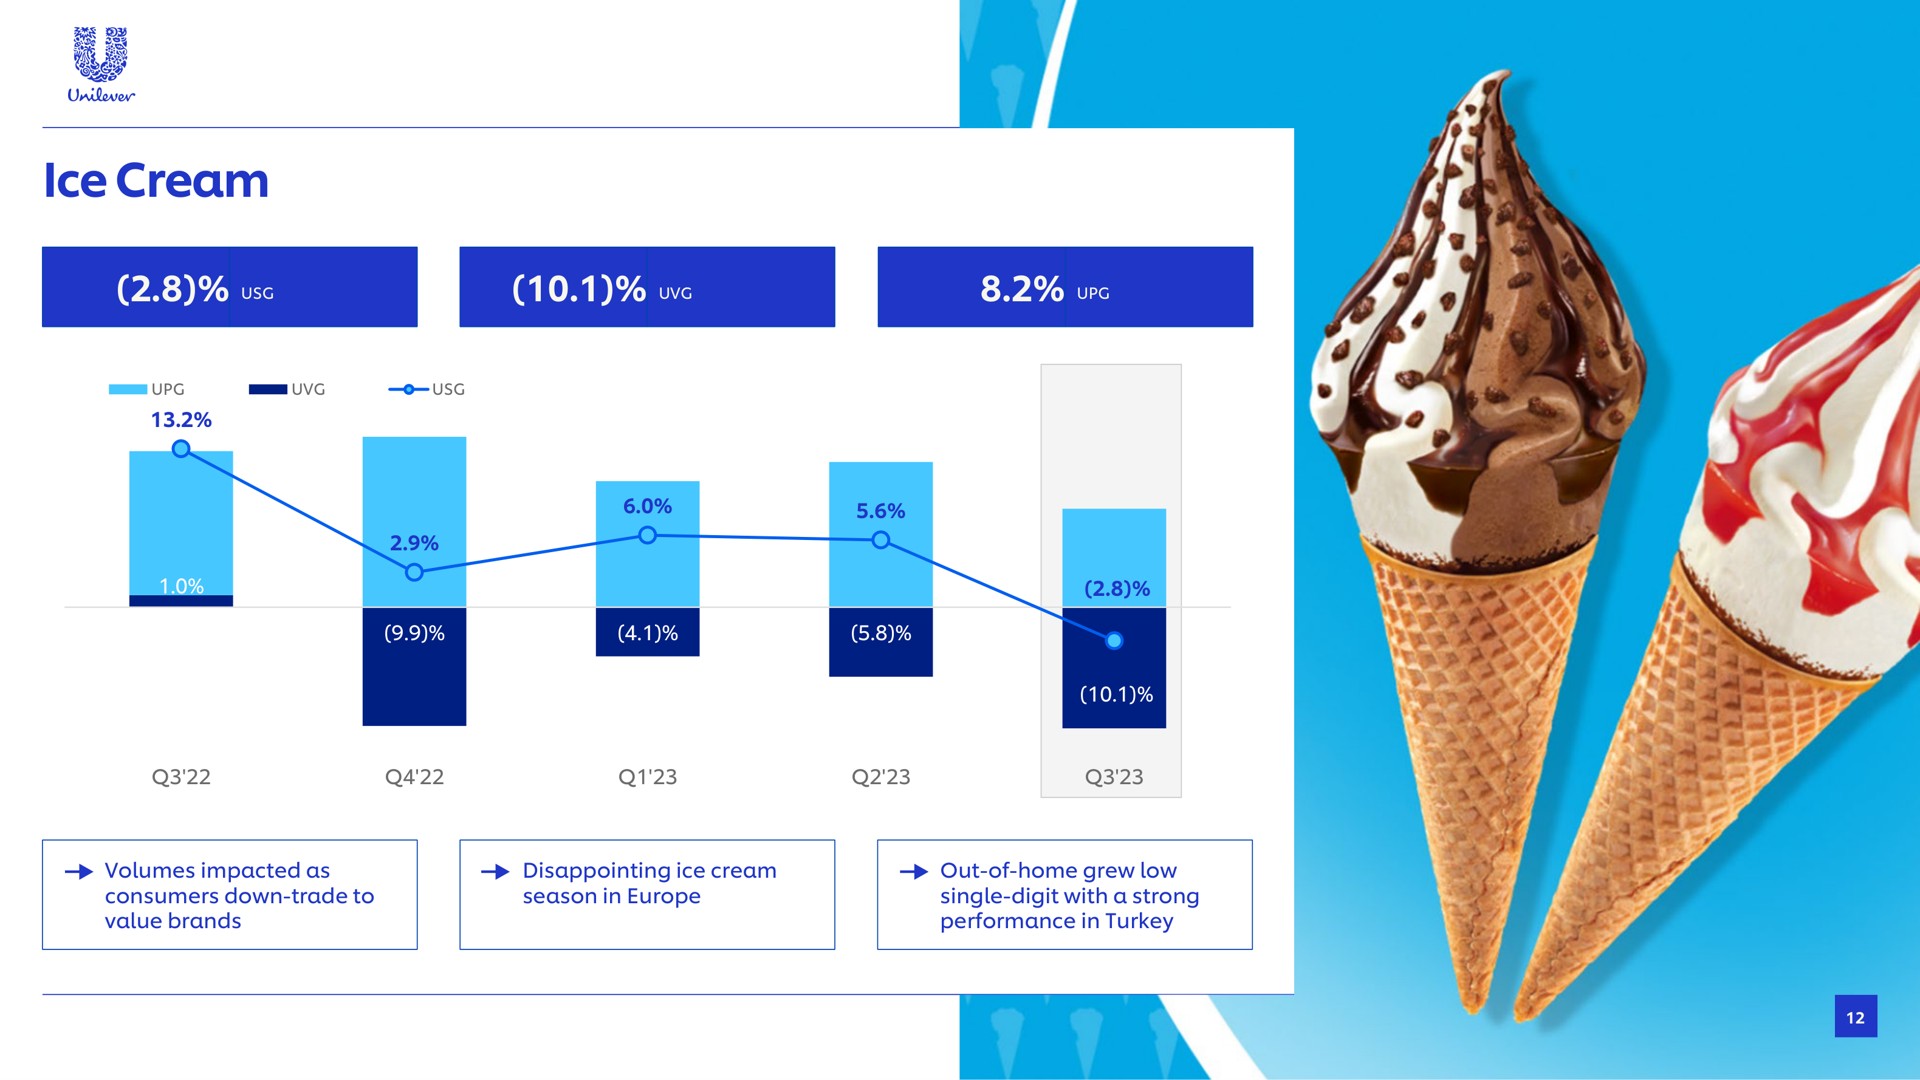 ice cream bey we gem volumes impacted as consumers down trade to value brands disappointing out of home grew low season in single digit with a strong performance in turkey | Unilever